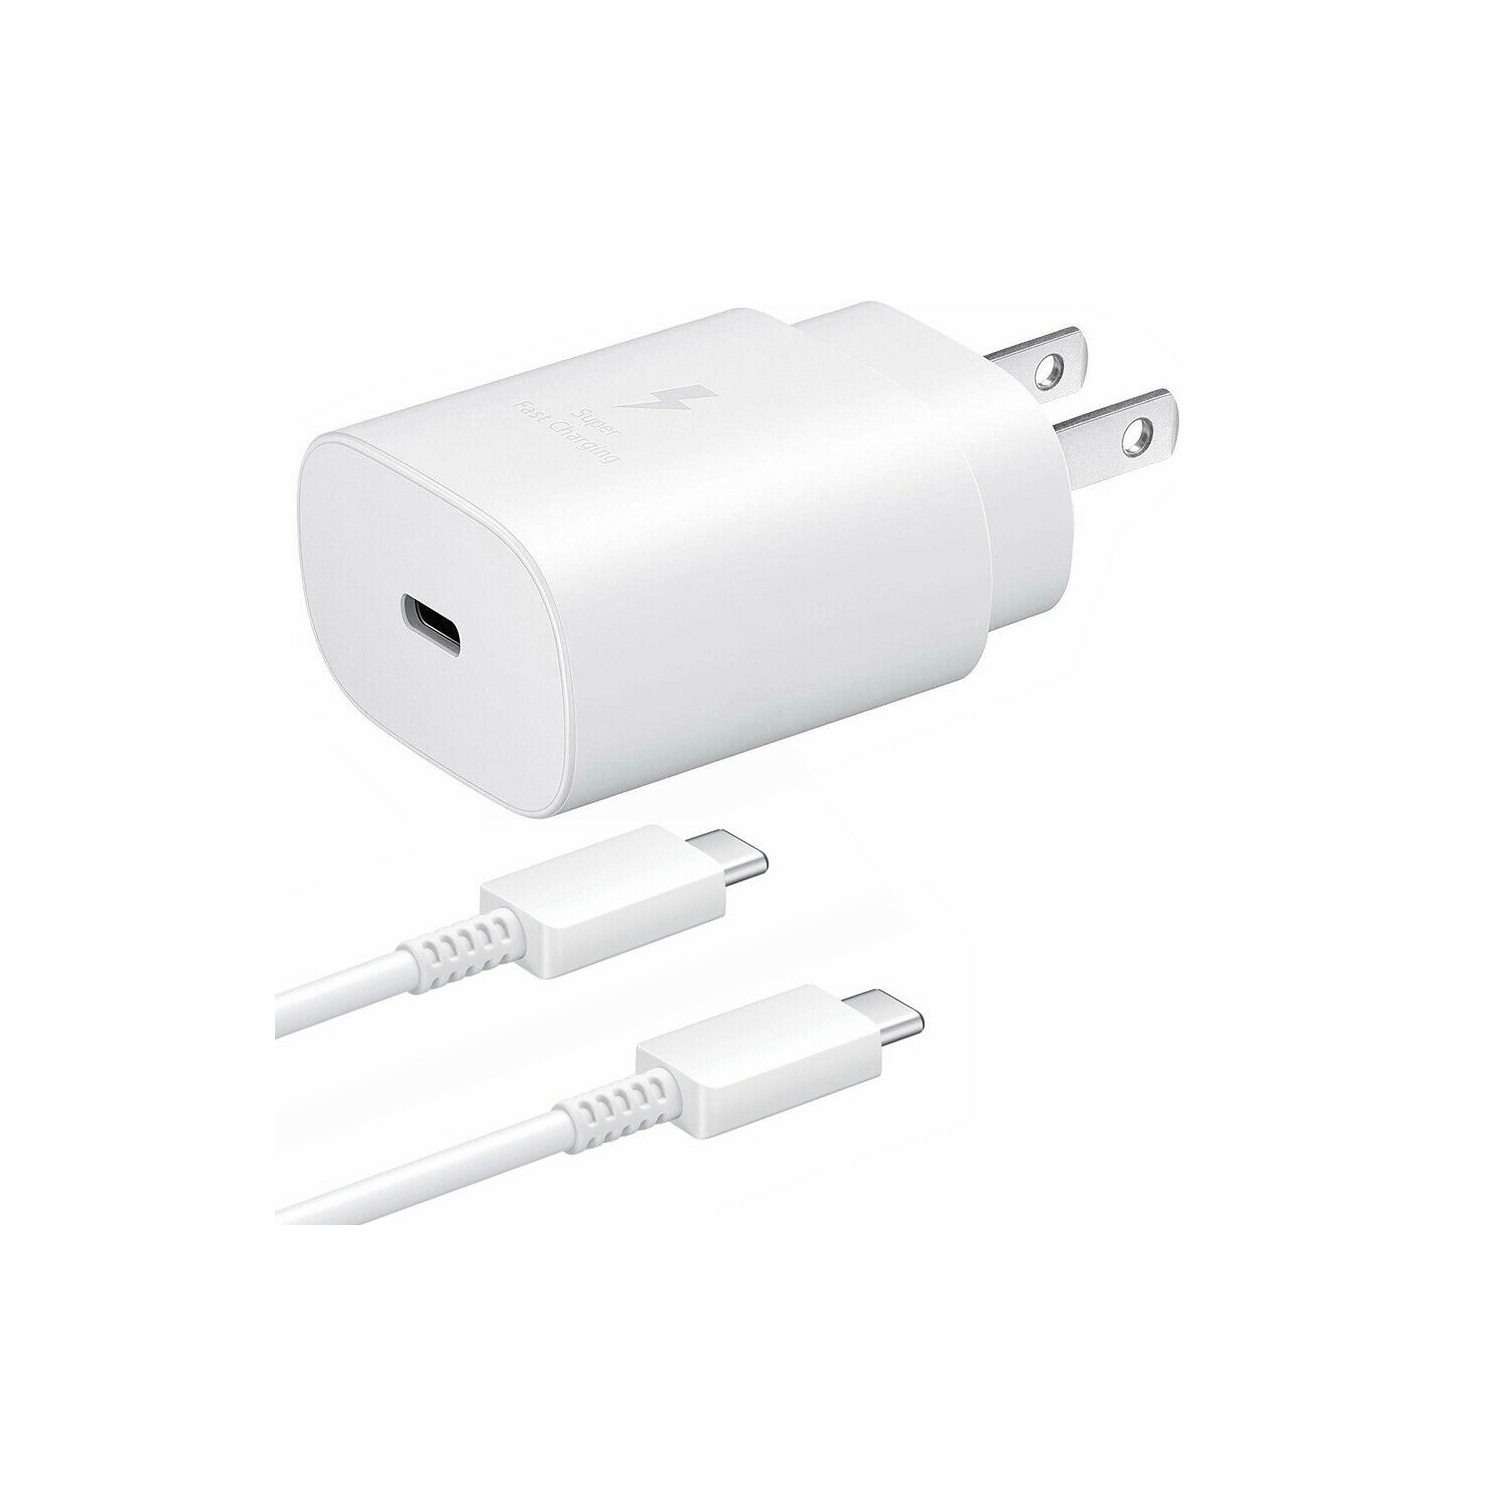 Samsung Galaxy Super Fast Charging Wall Charger Adapter with Type-C to Type-C Cable - whpy For Galaxy S20 , S20+ , S10 , S10+ , NOTE 1 - WHITE